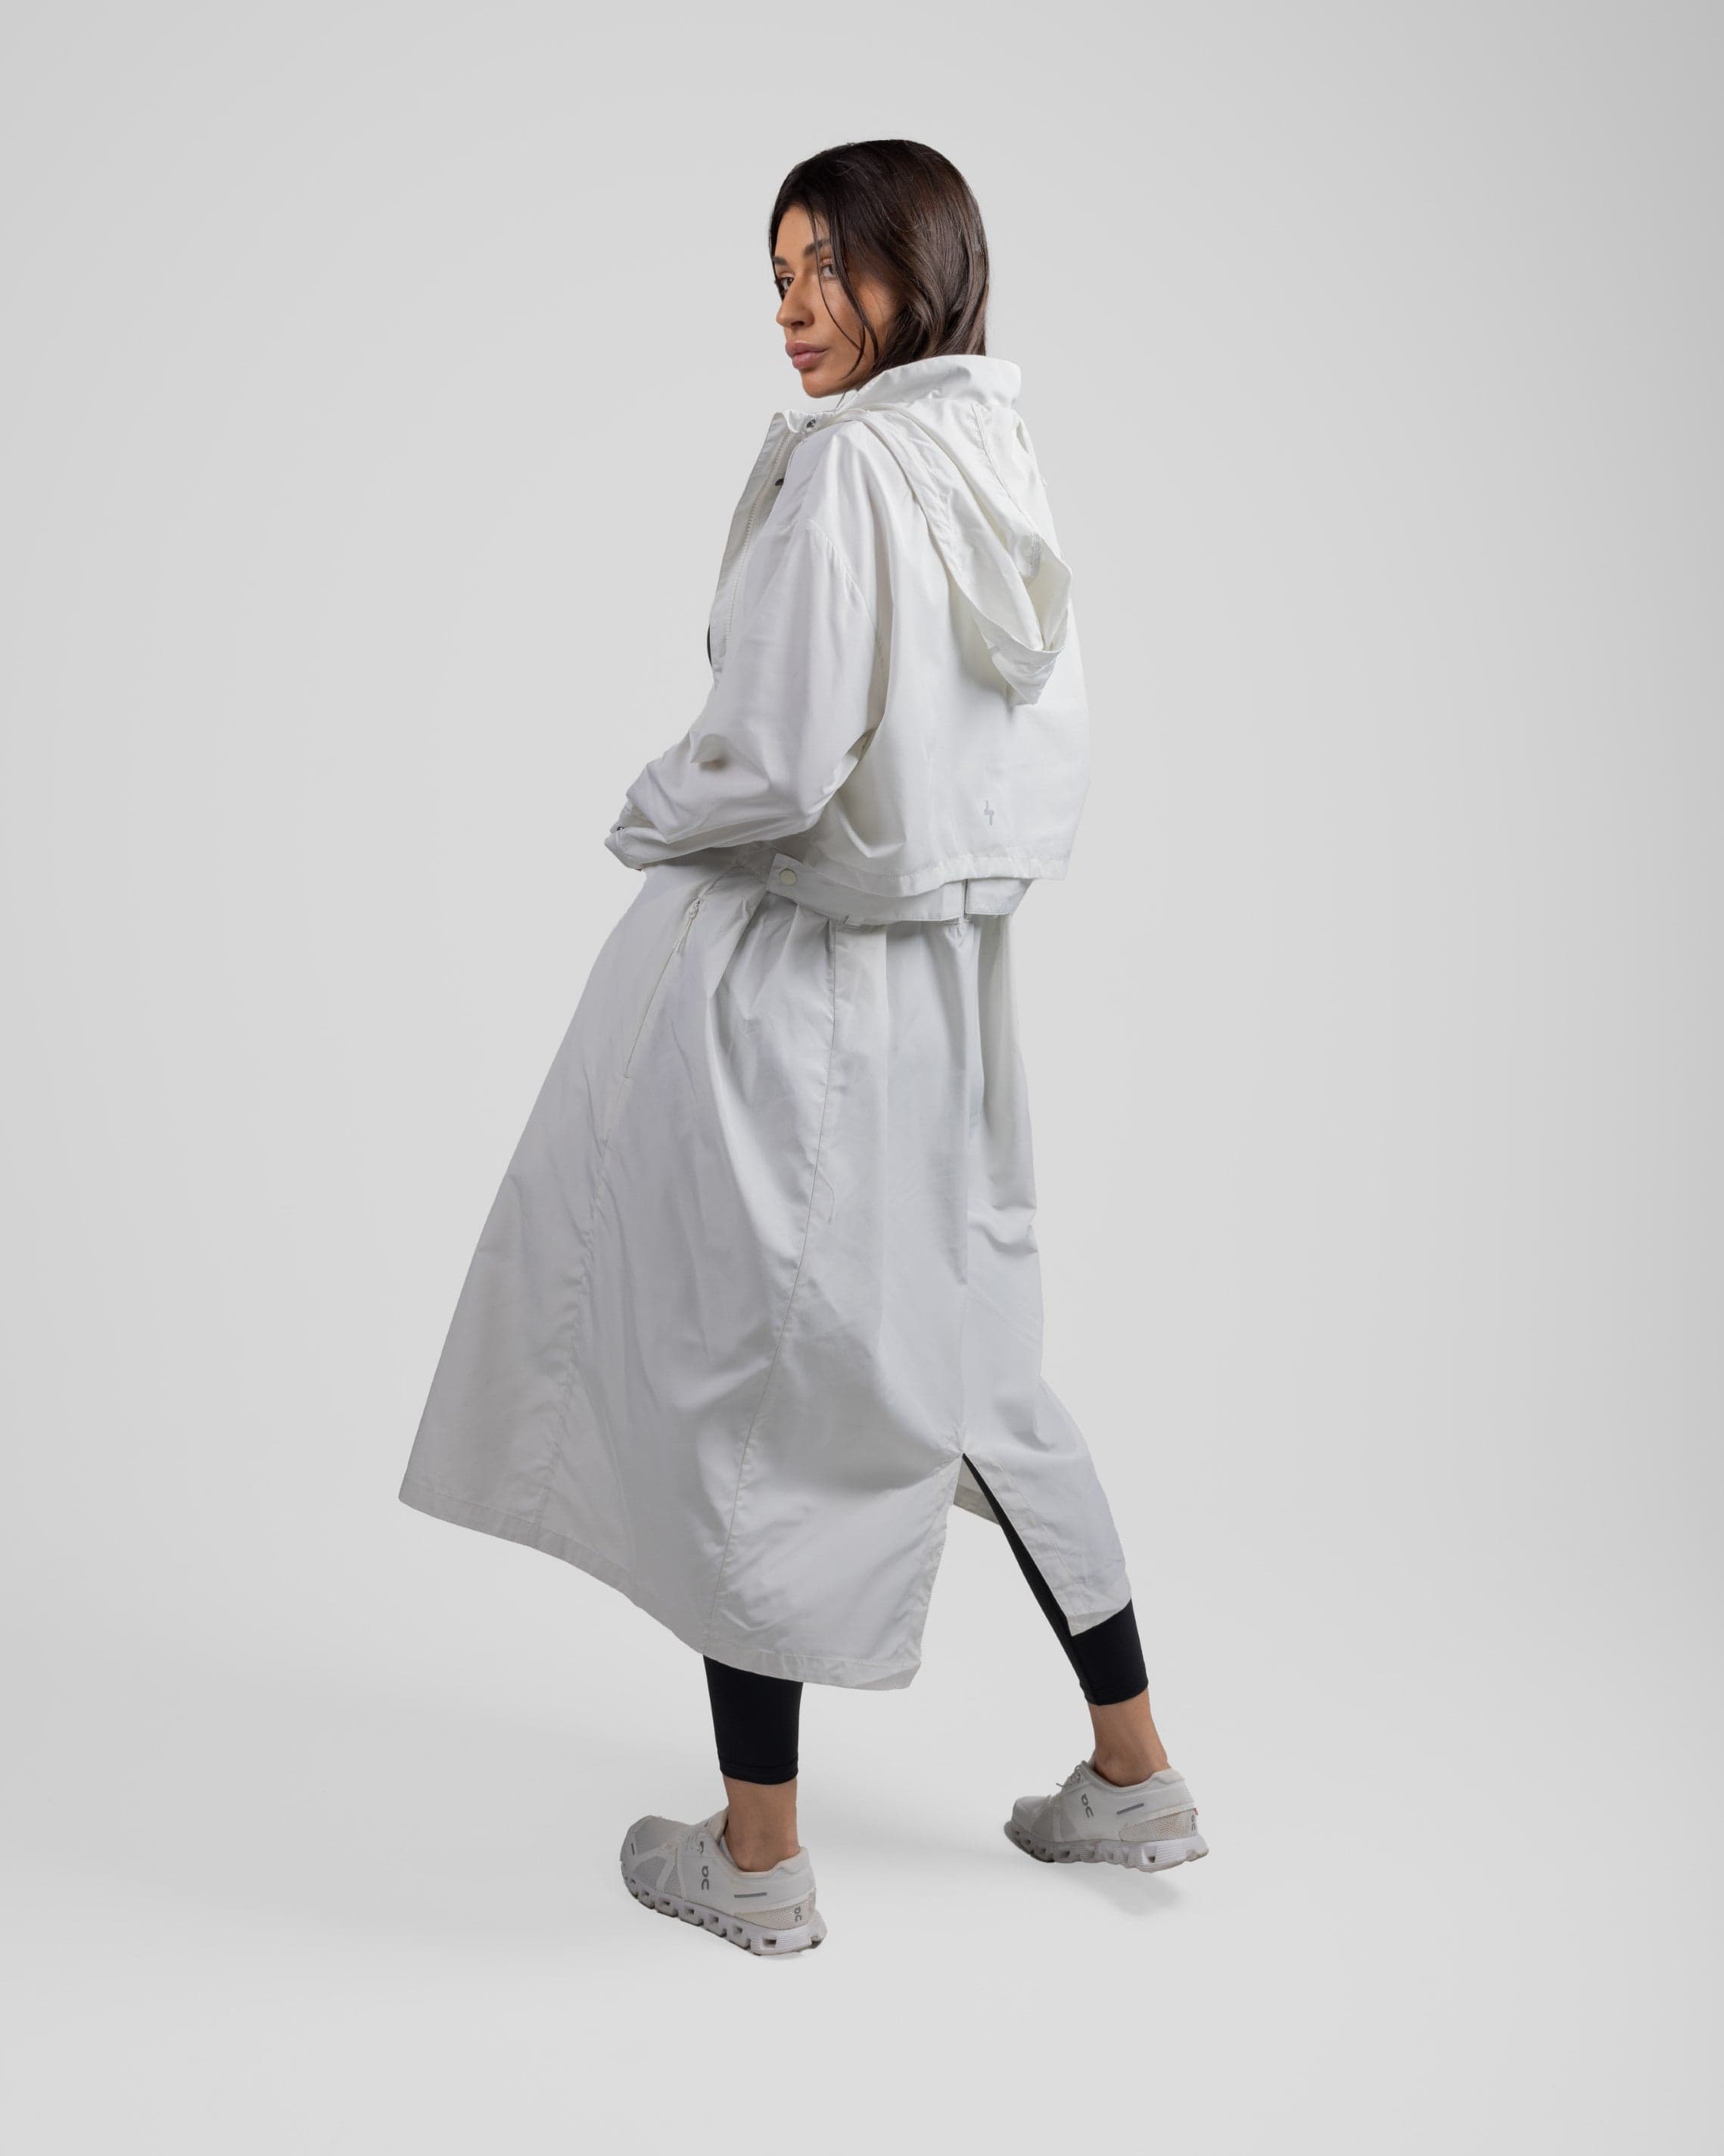 A model viewed from behind, turns her head to her left, wearing a stylish modest Off White MAK LIGHT PARKA by Qynda.